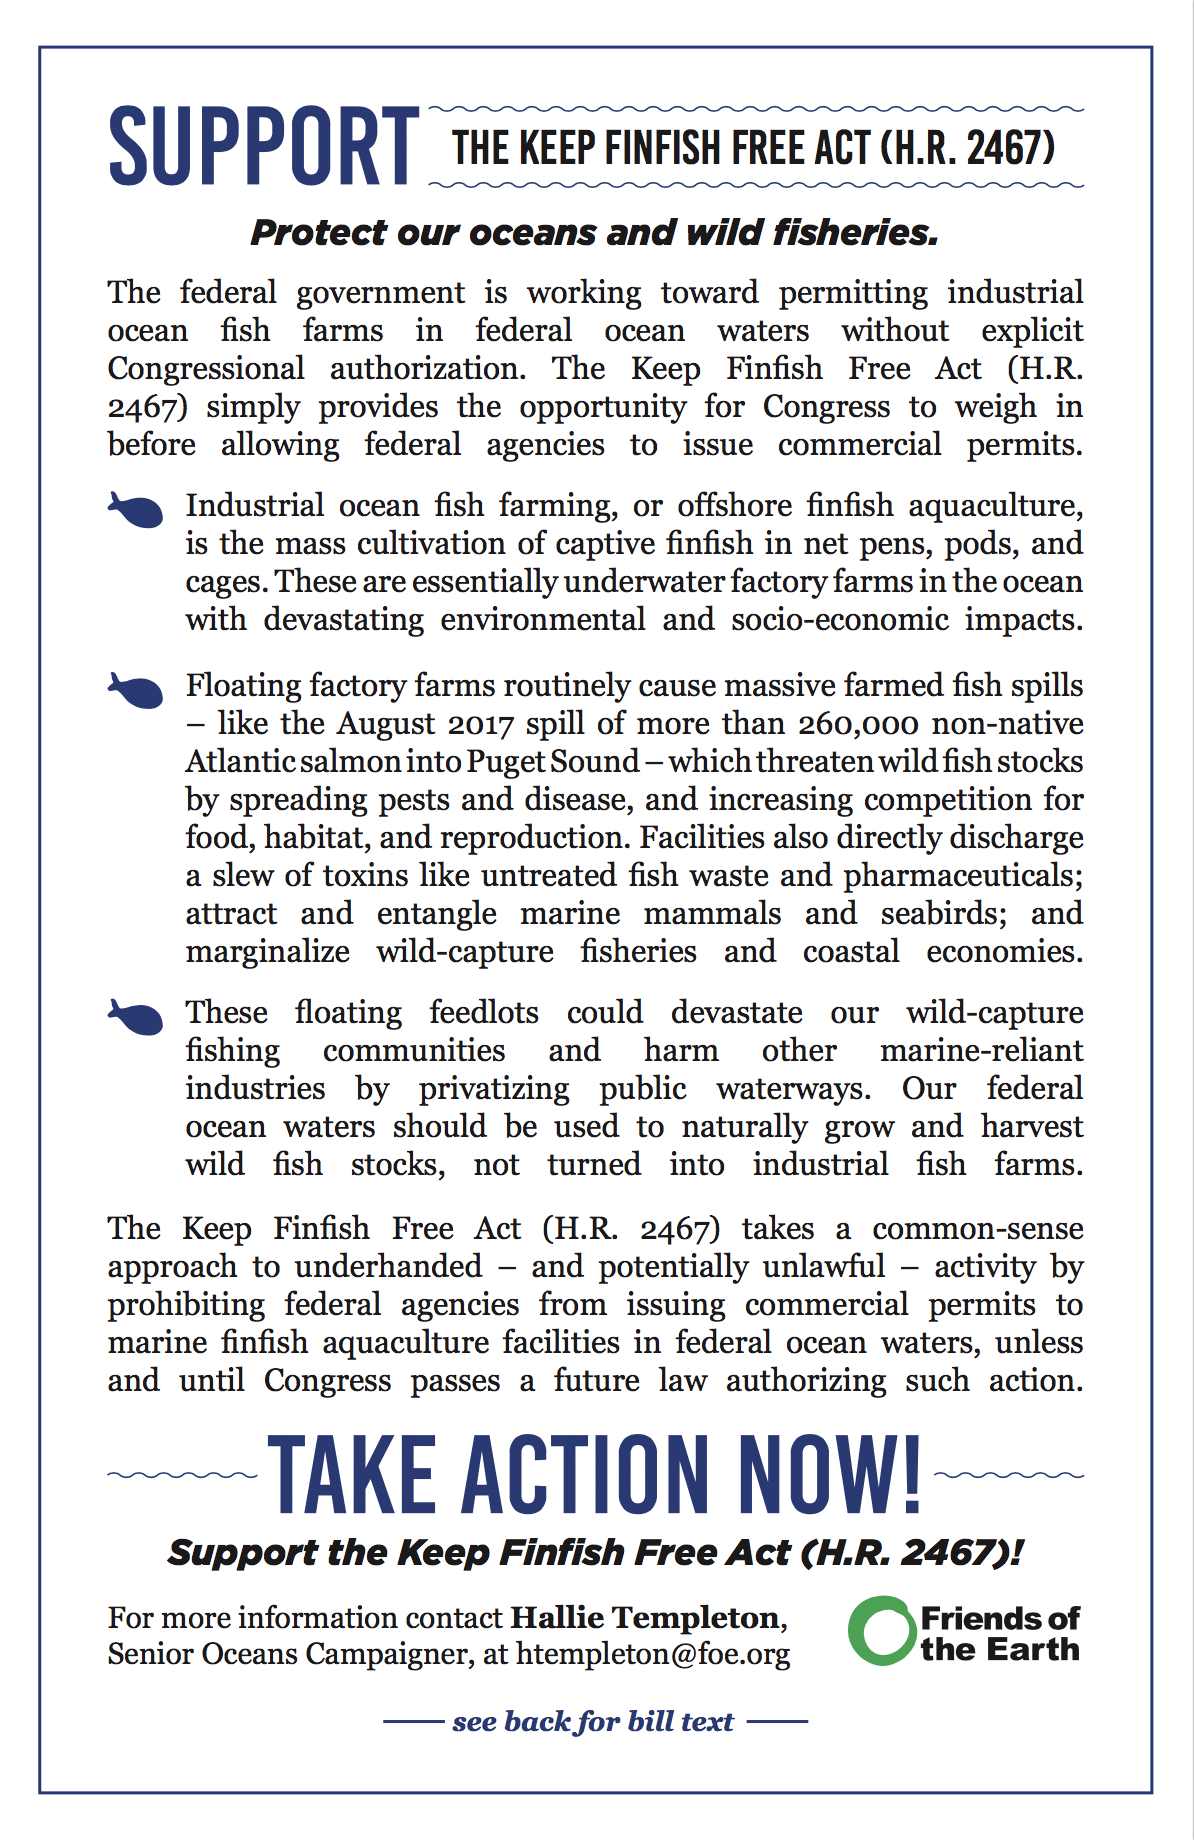 Support the Keep Finfish Free Act (HR 2467)